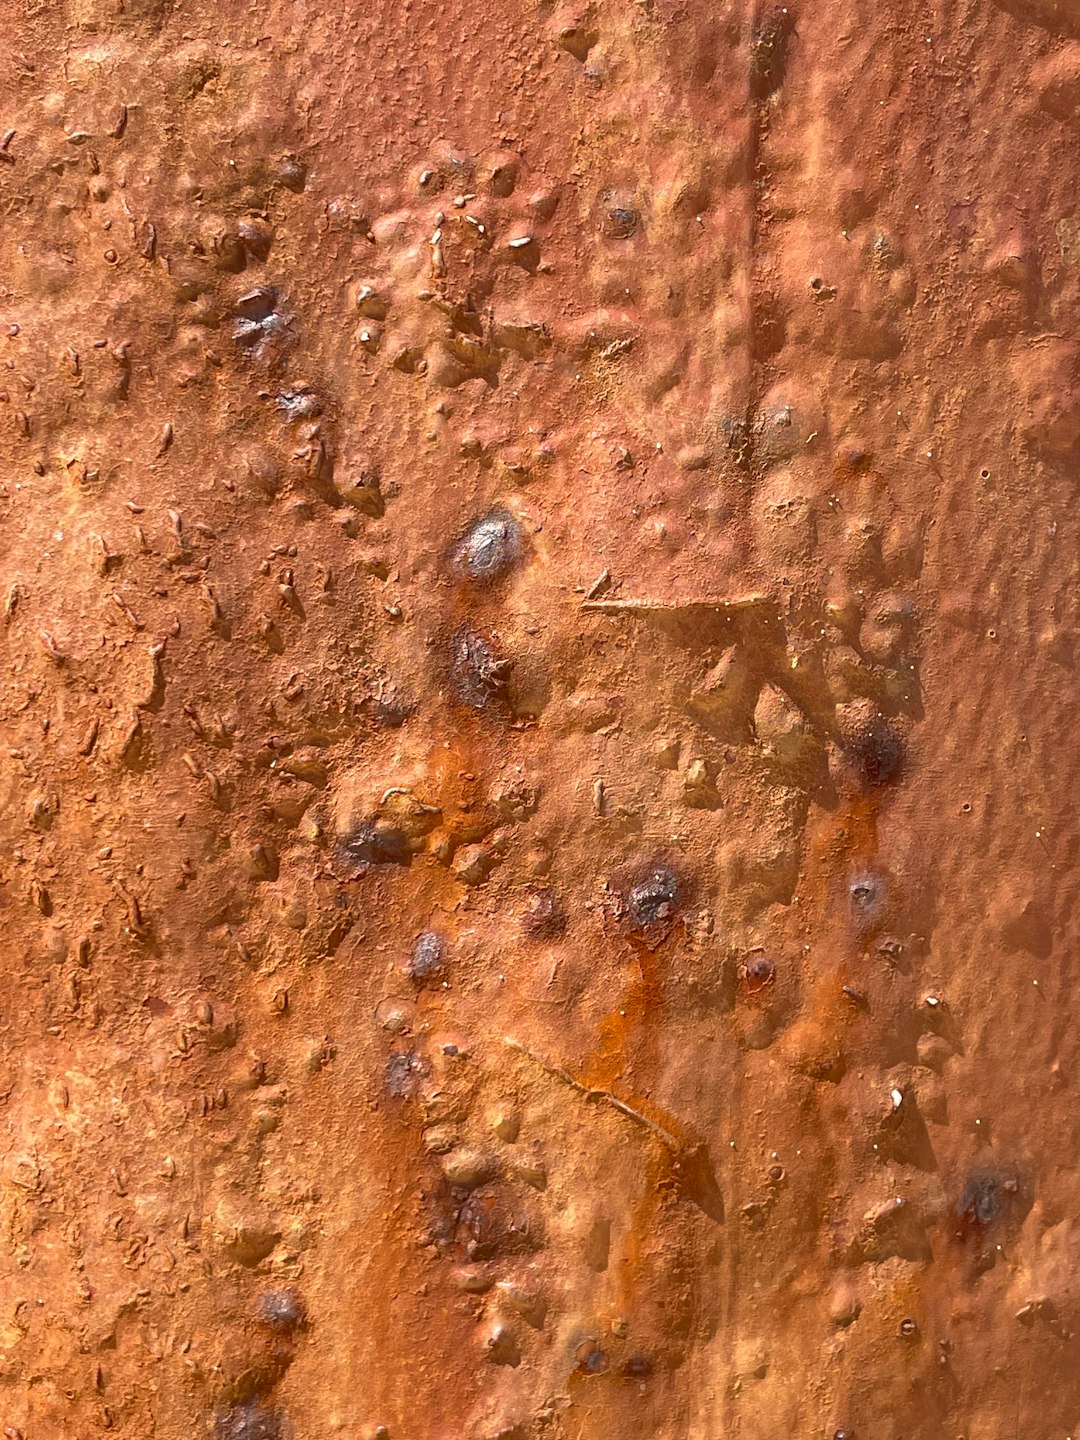 brown and black ant on brown soil